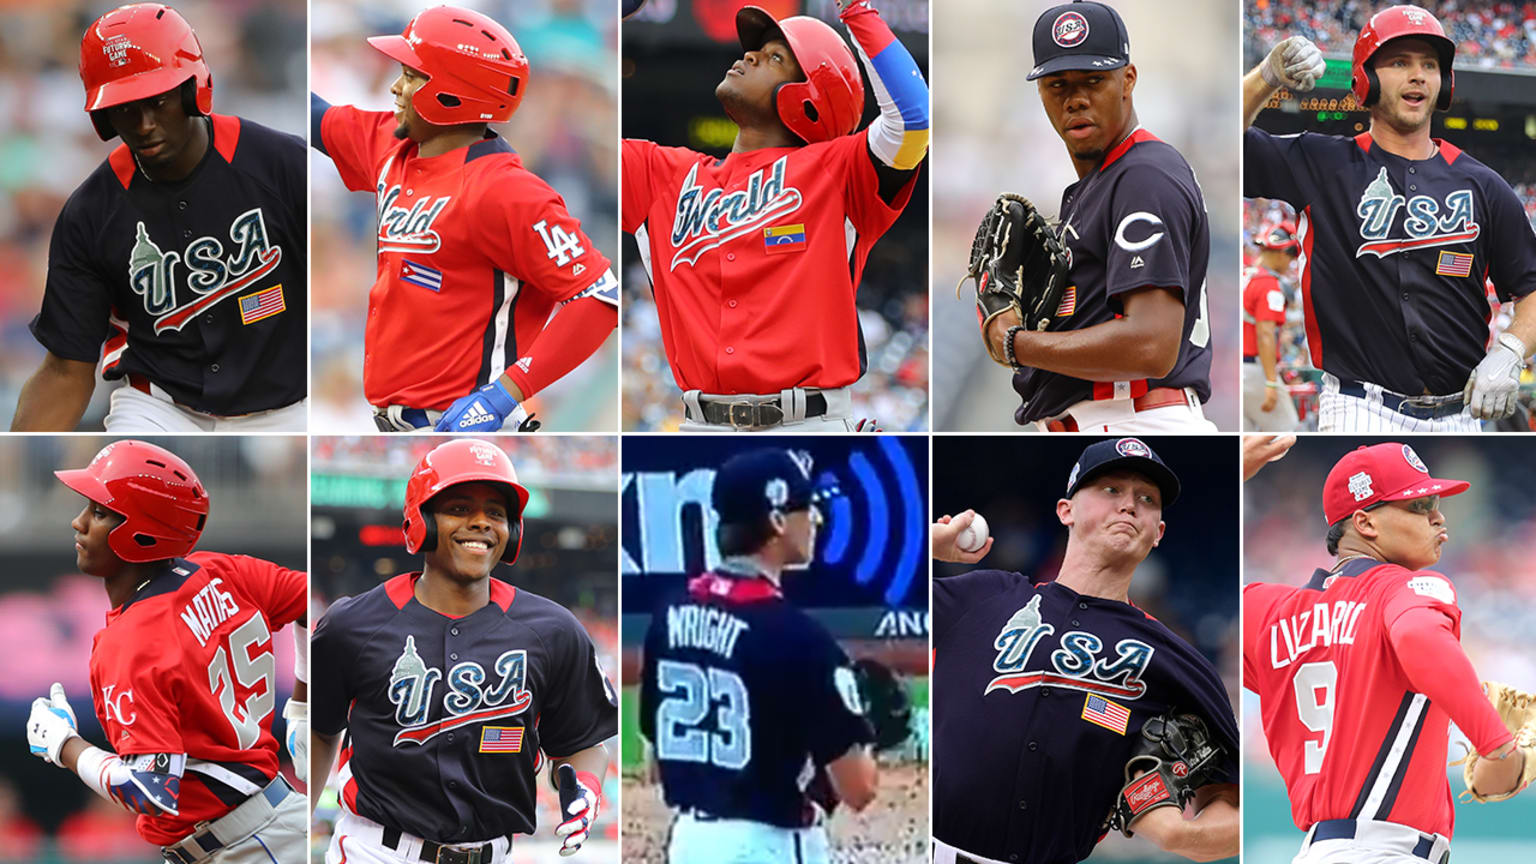 2018 MLB Futures Game Preview - Last Word On Baseball